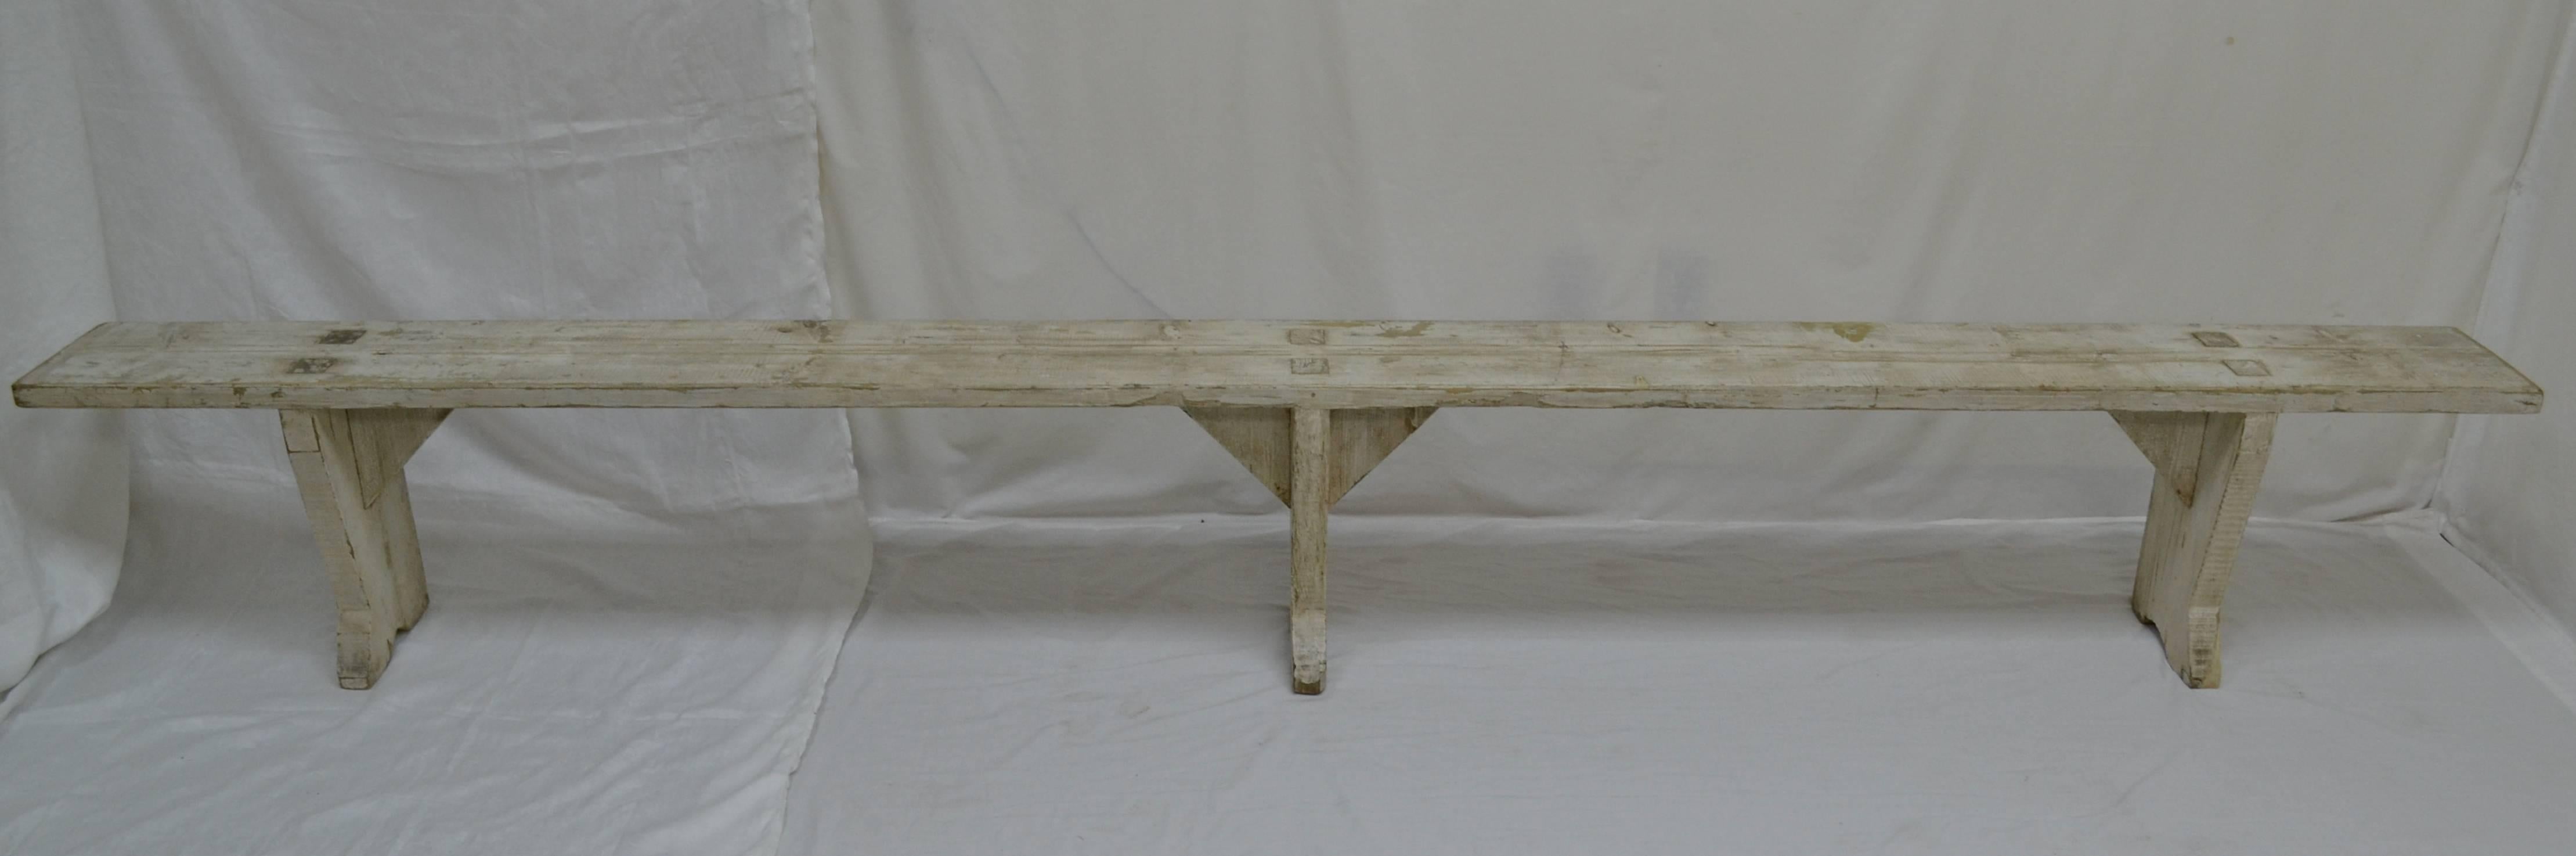 This is a huge form or backless bench over ten feet long. The three trestle-style legs, from stock 2” thick, are through-tenoned into the seat for strength and stability, then reinforced underneath with solid triangular braces. The piece is in old